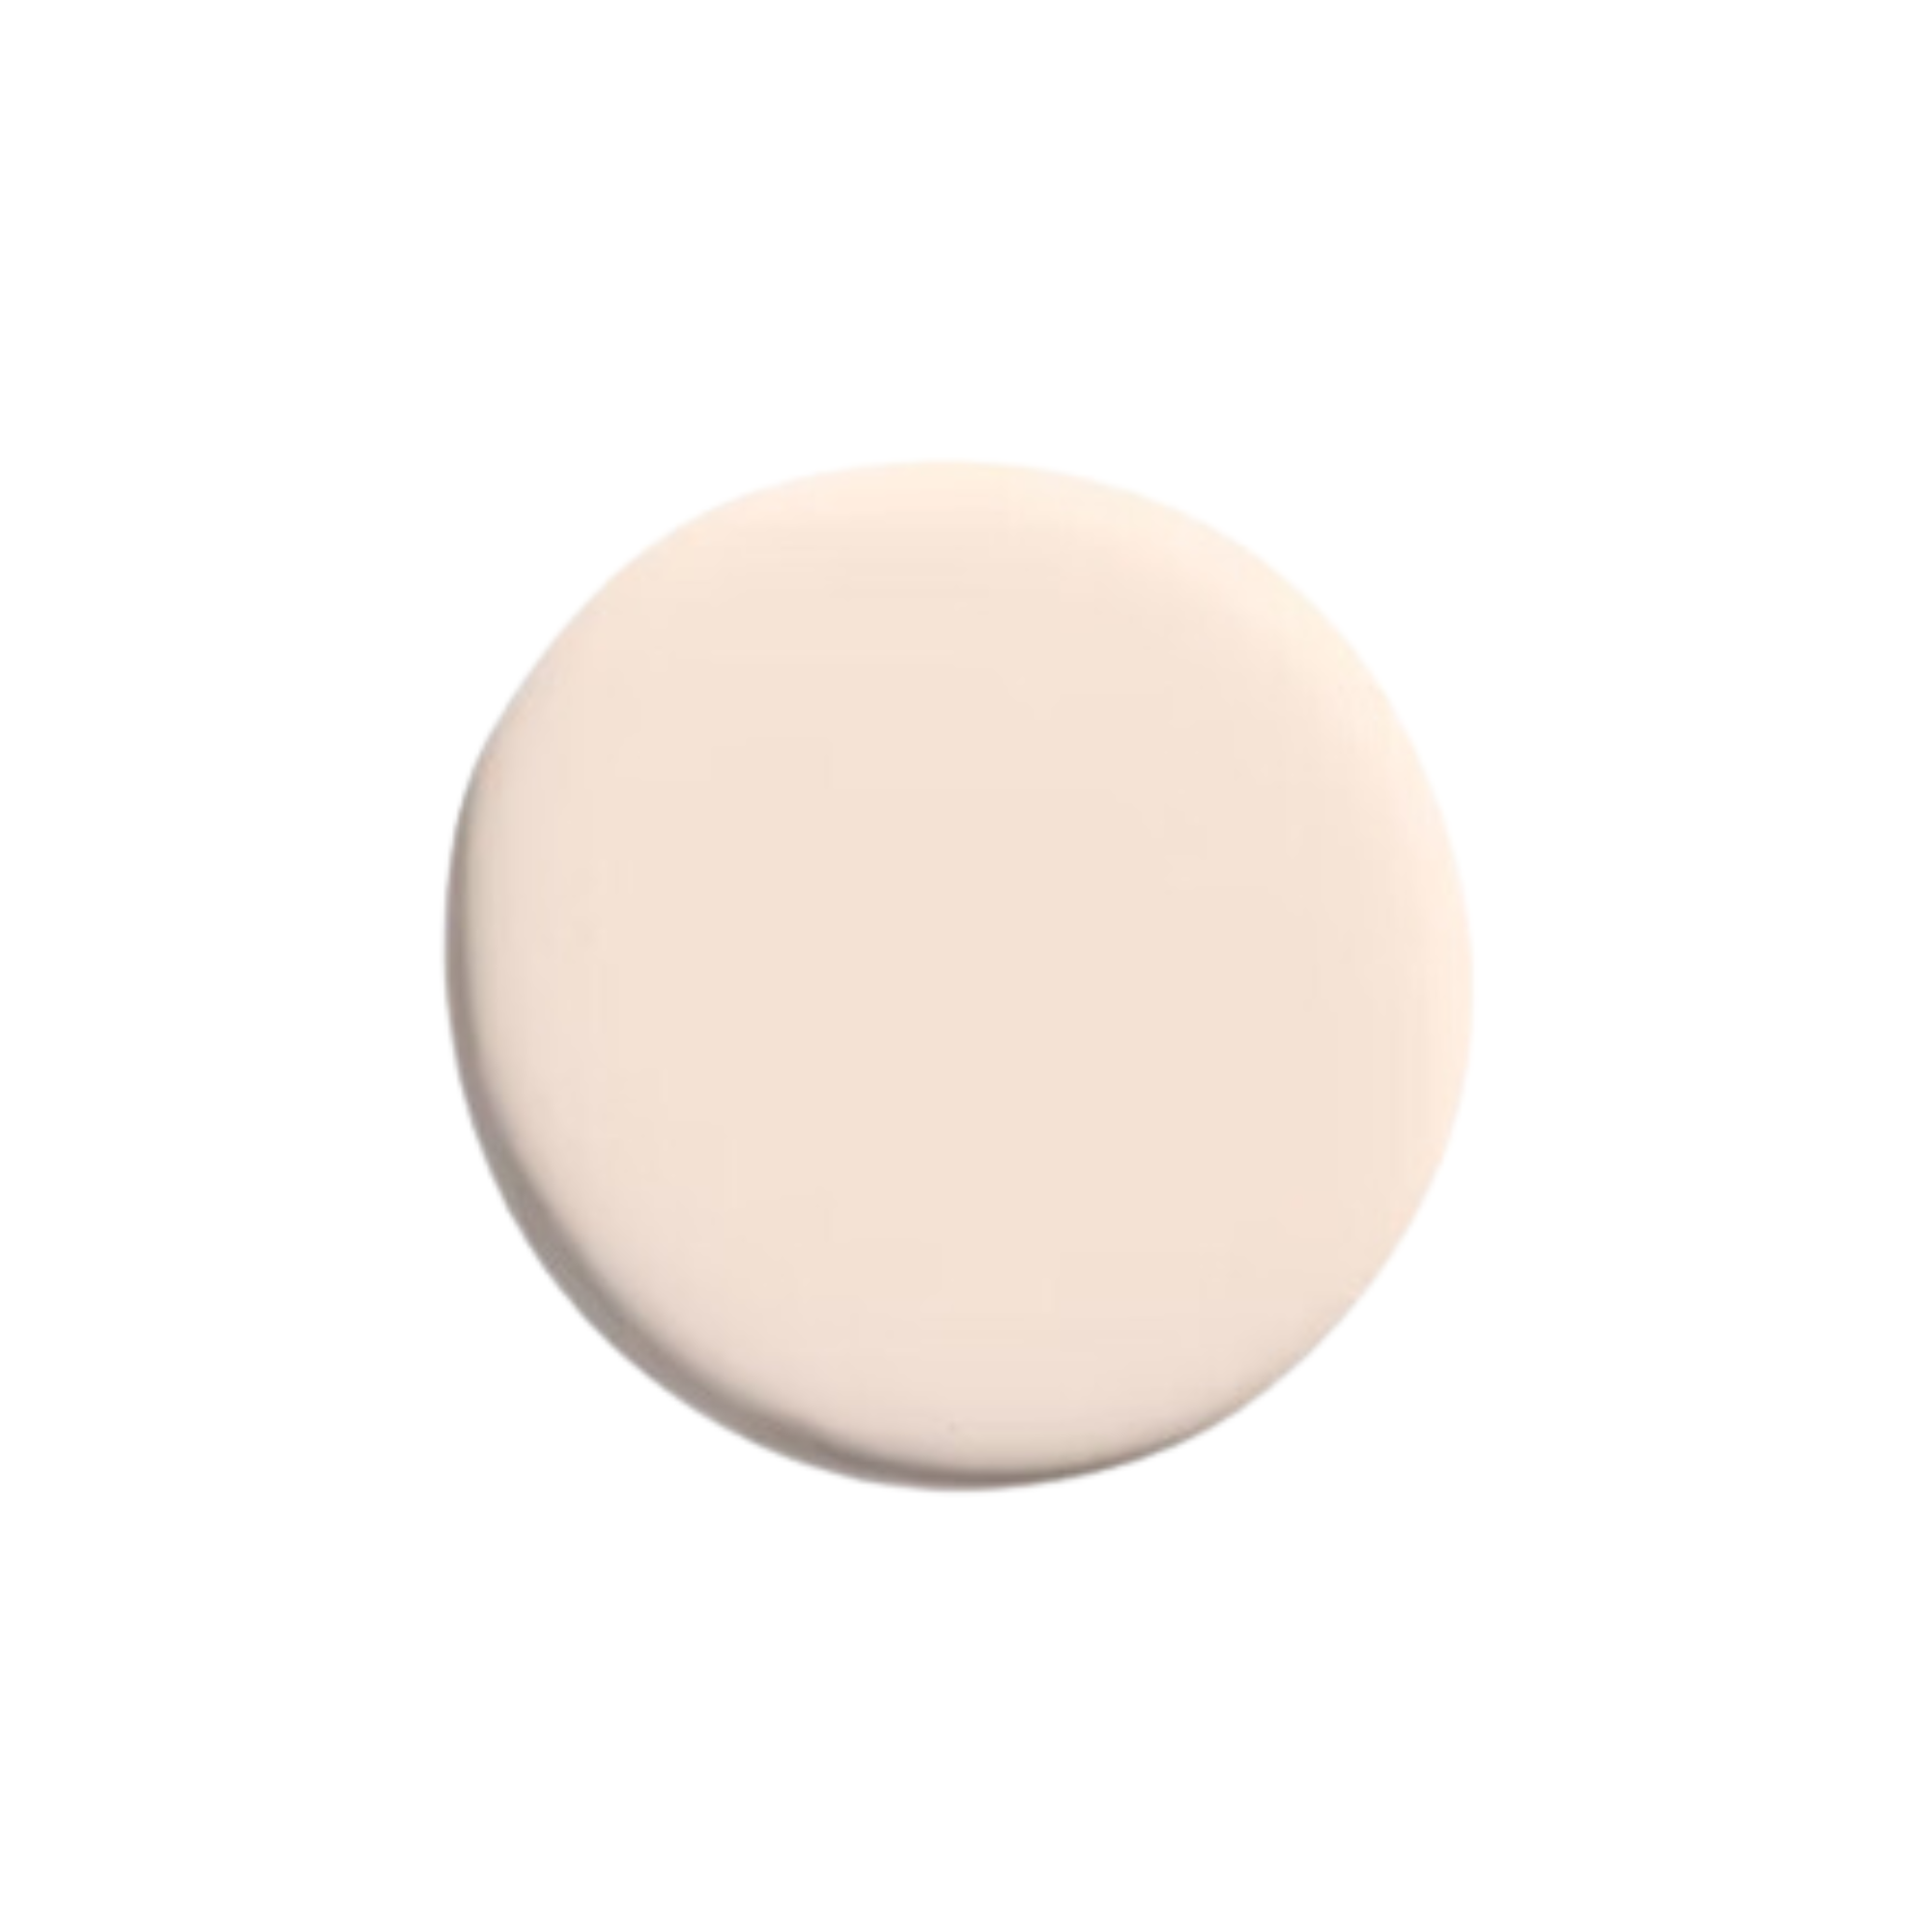 A swatch of creamy beige paint